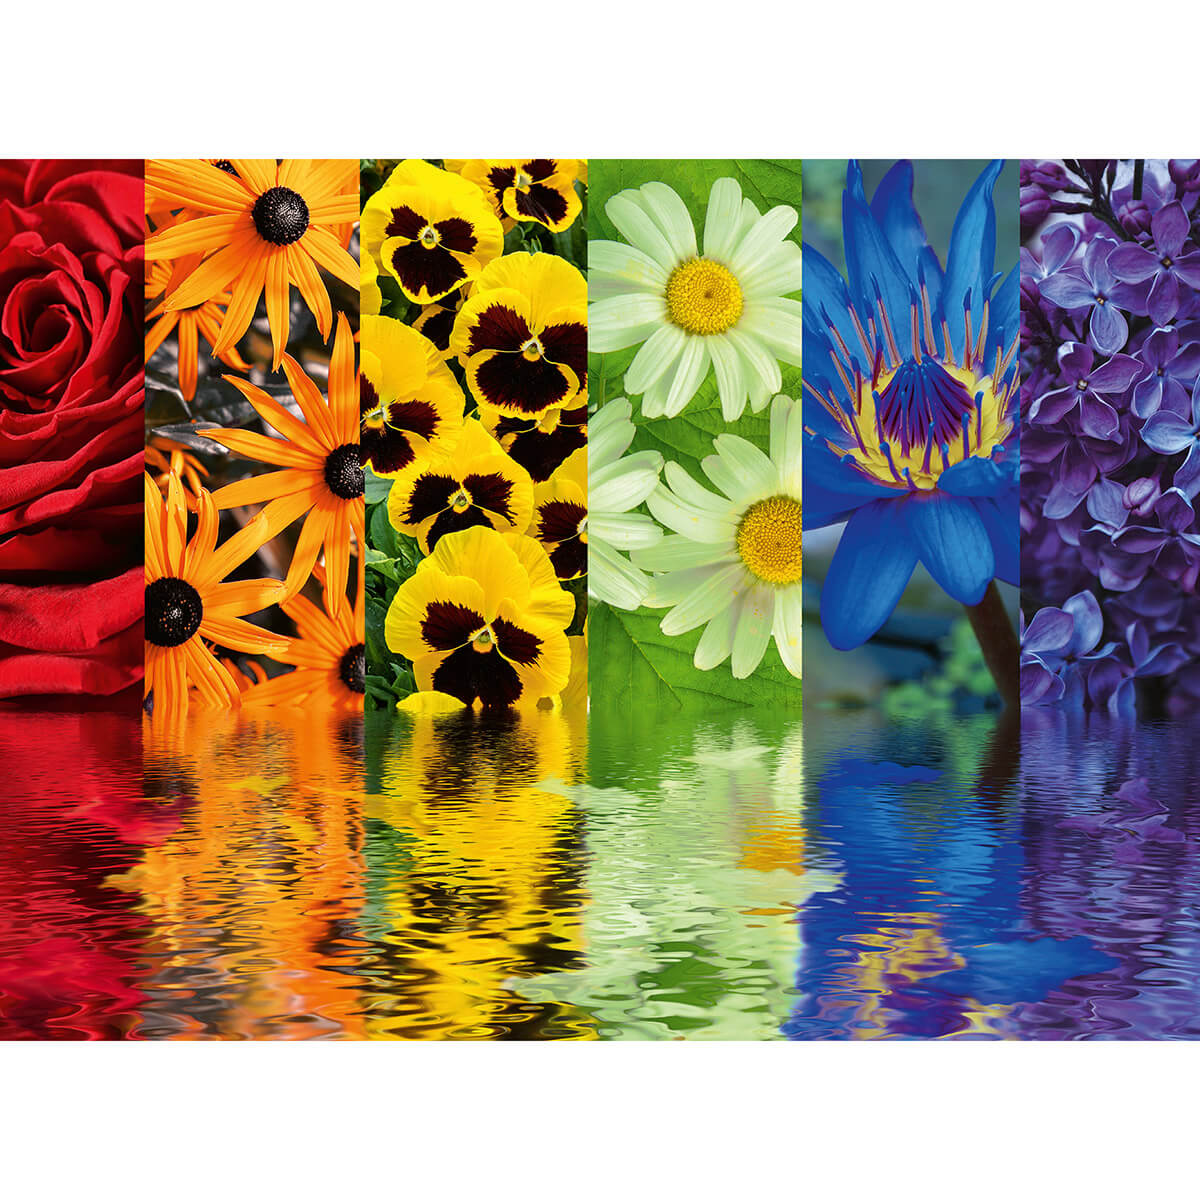 Ravensburger Floral Reflections 500 Piece Jigsaw Puzzle